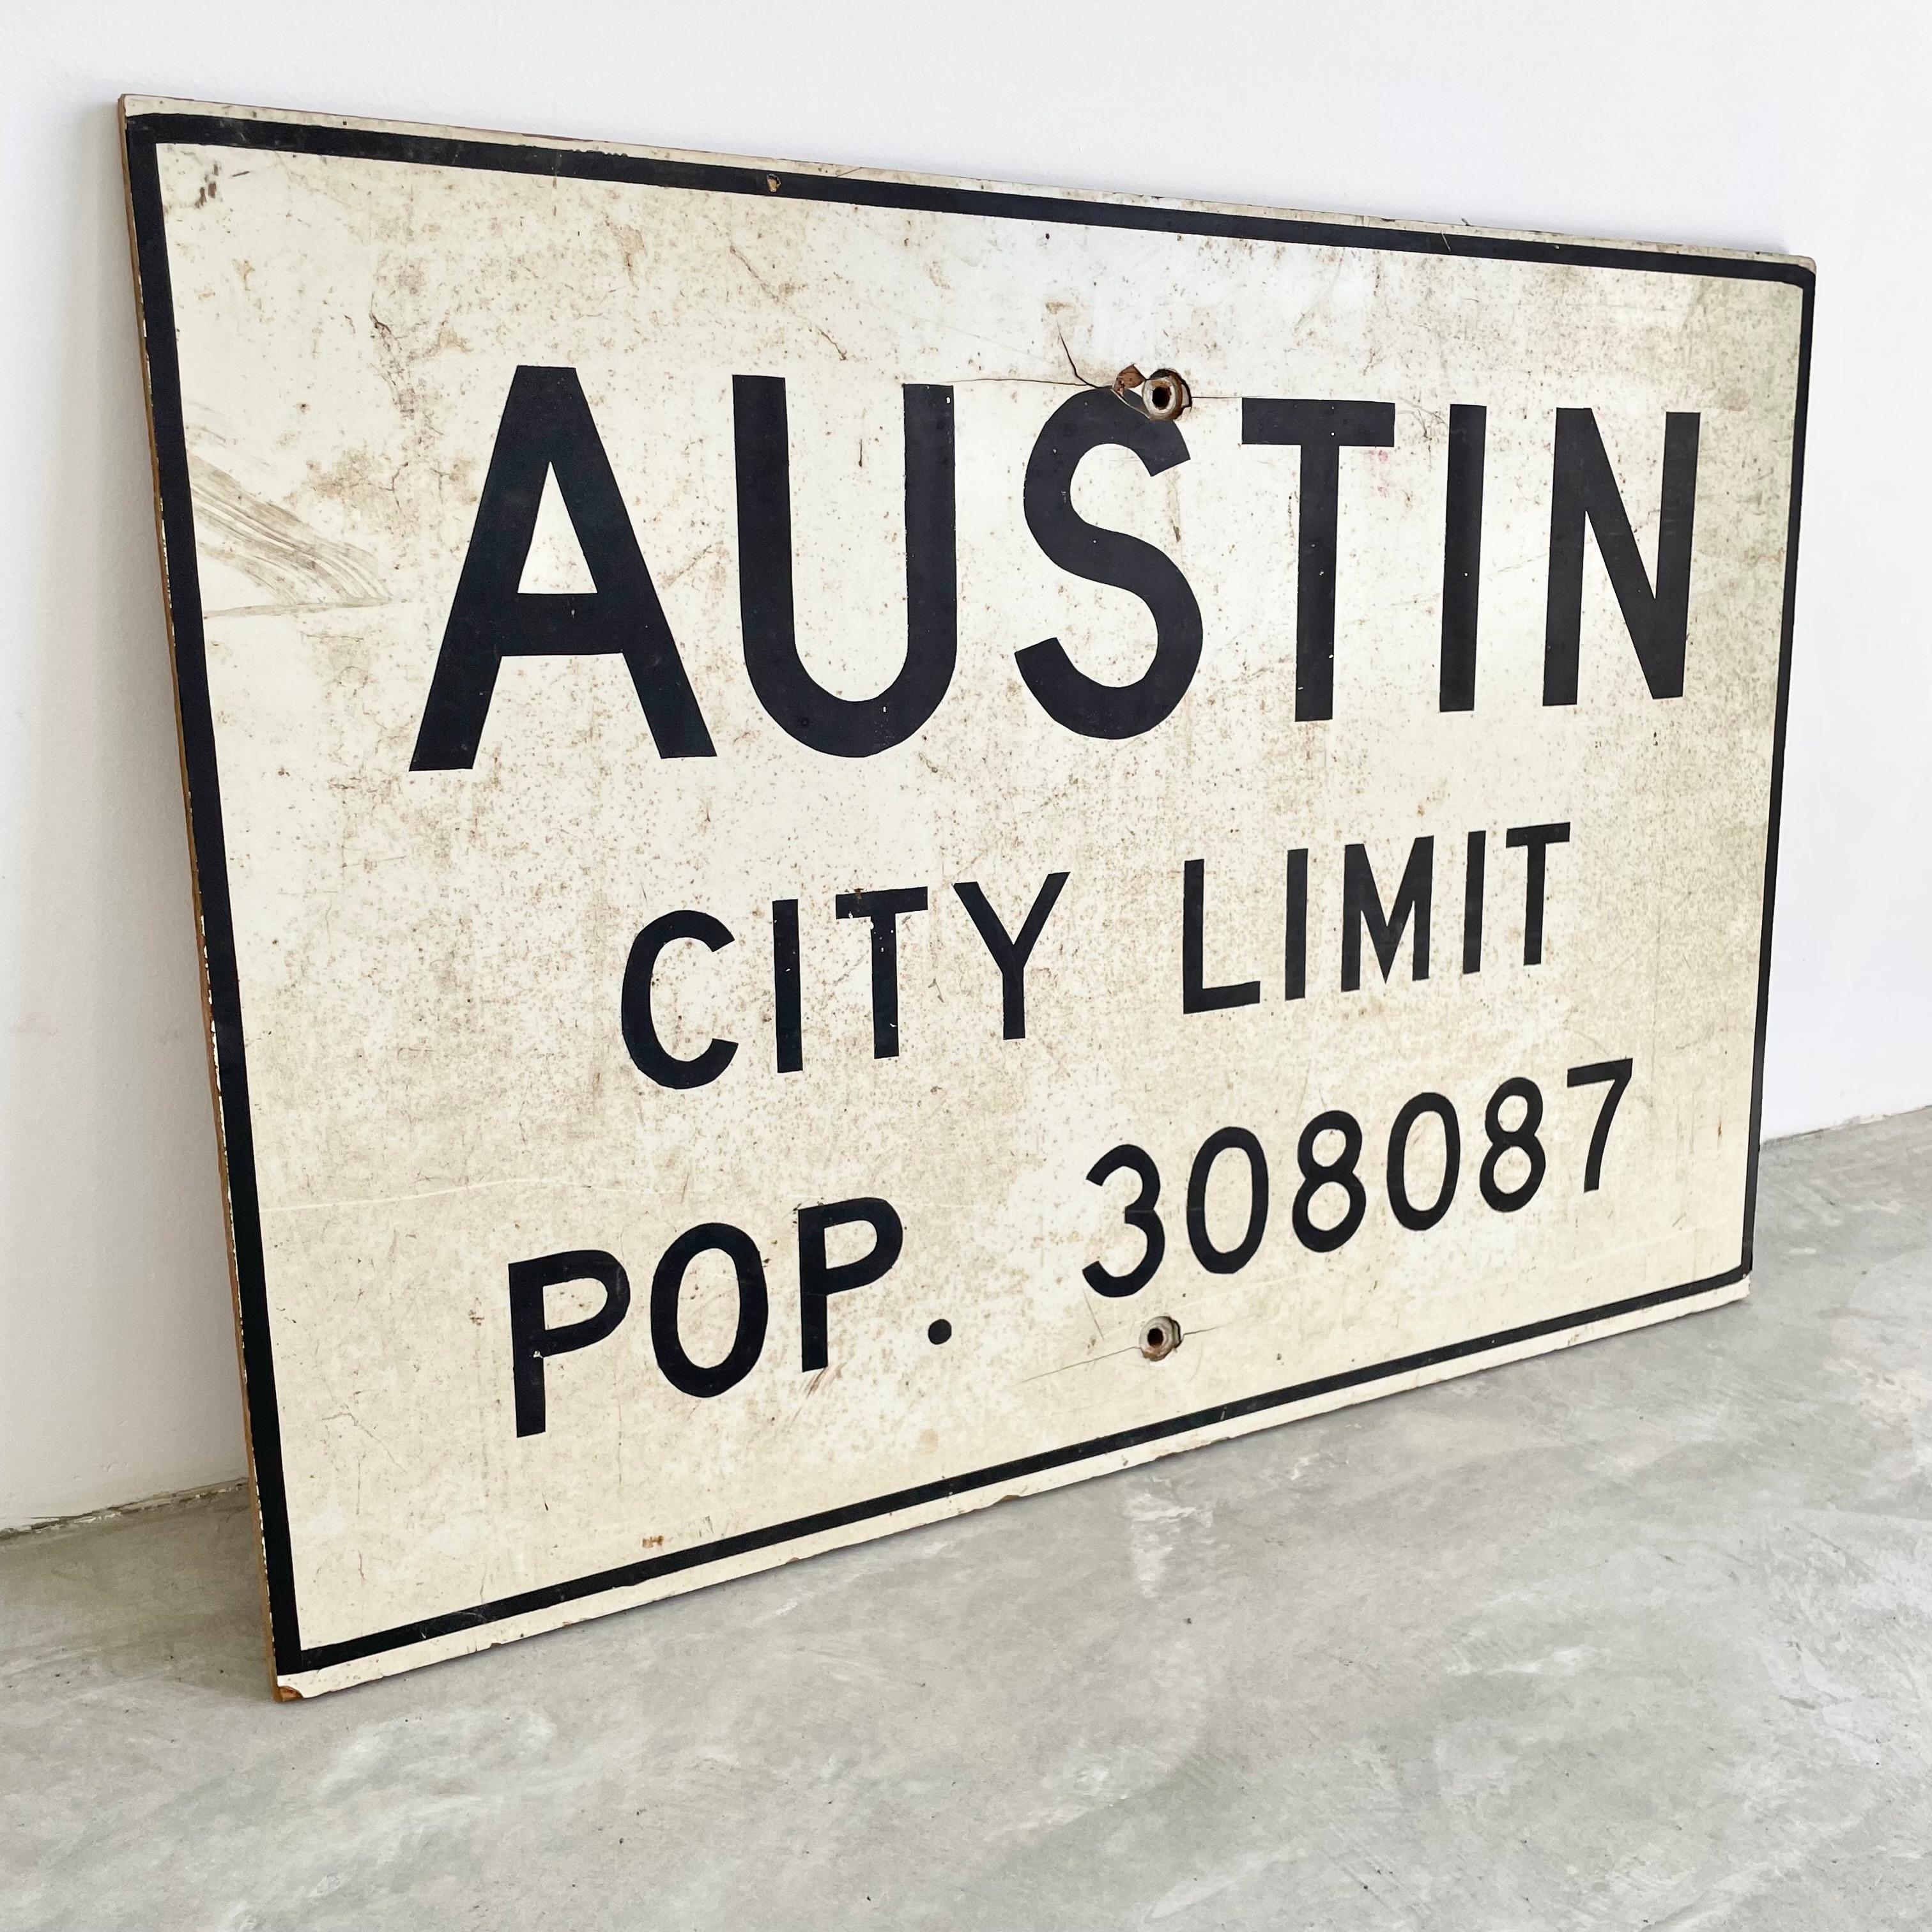 Incredible vintage Austin city limit freeway sign from 1978. Made in a 3/4